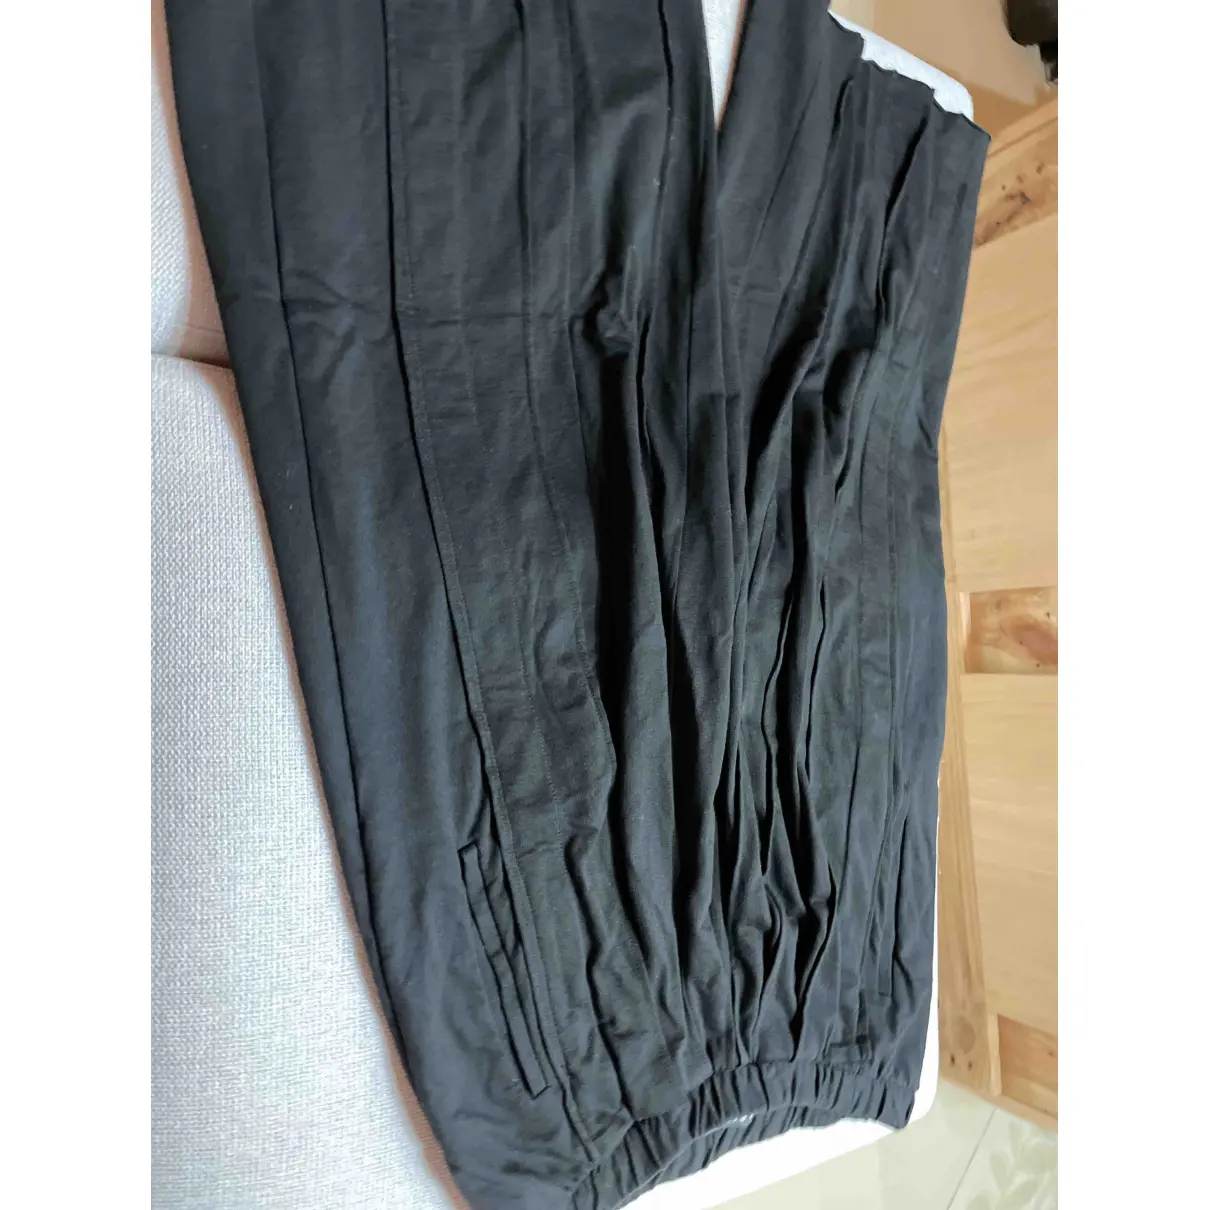 Large pants LOST & FOUND RIA DUNN